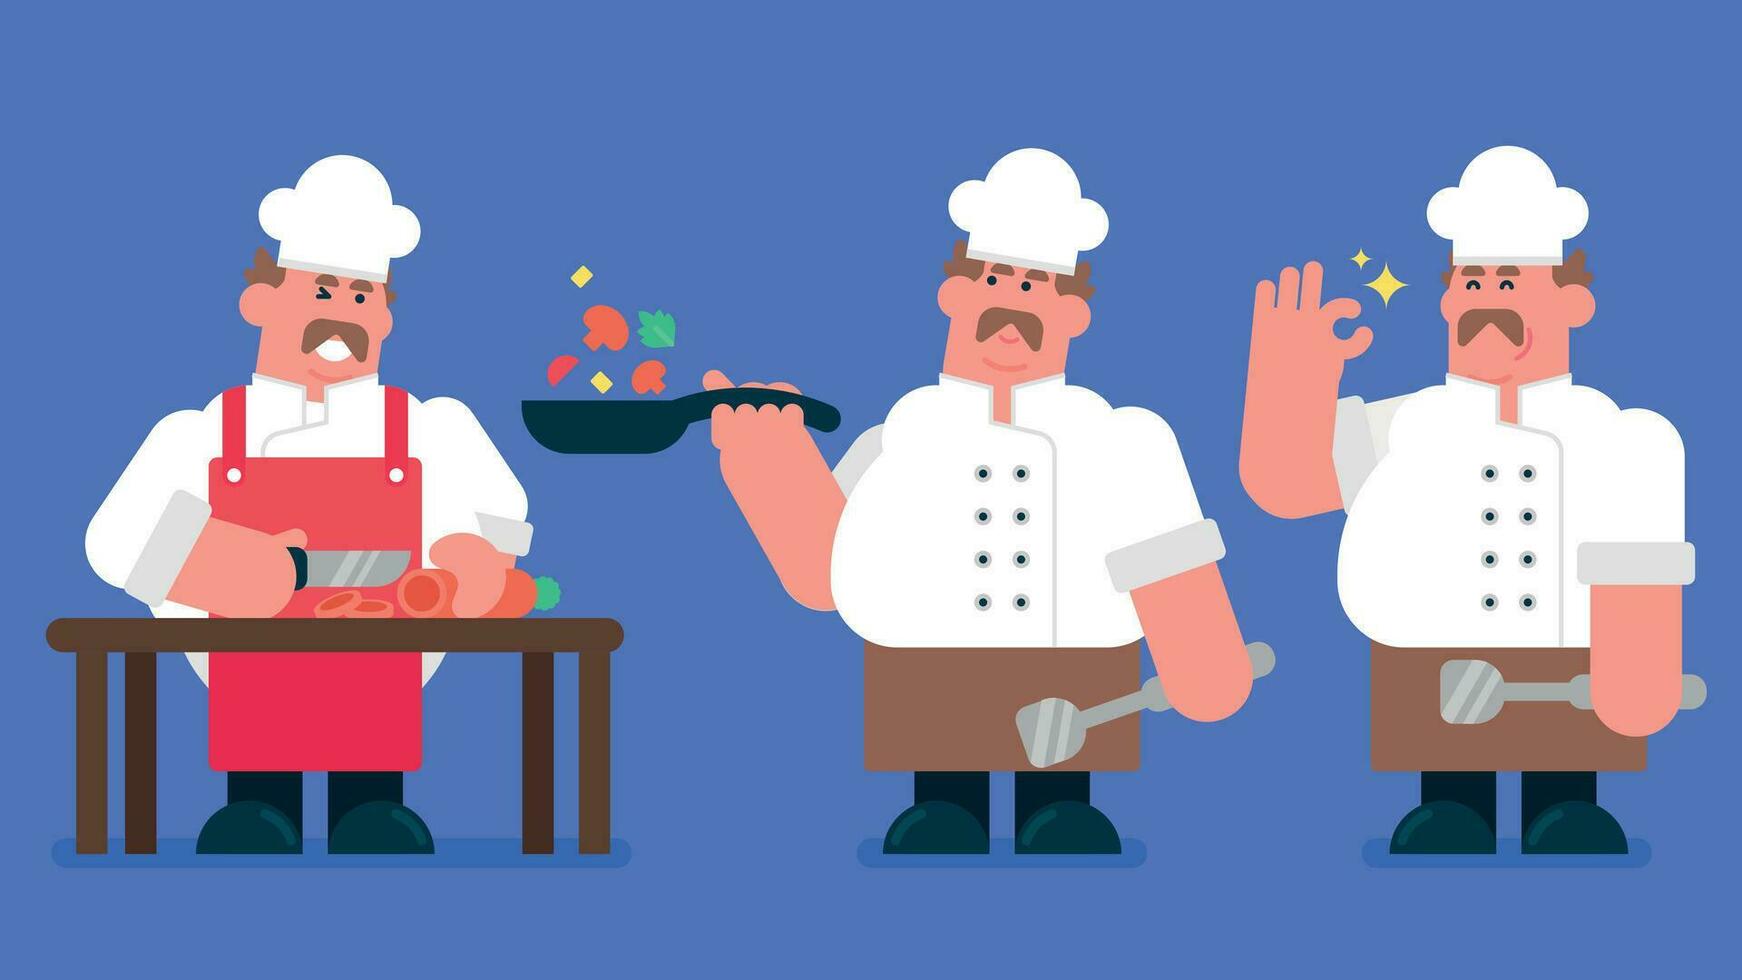 Collection of cartoon man preparing food, restaurant cook chef with hat and cook uniform, chef brings food, preparing meals for dinner, making salad, holding frying pan Flat vector illustration.